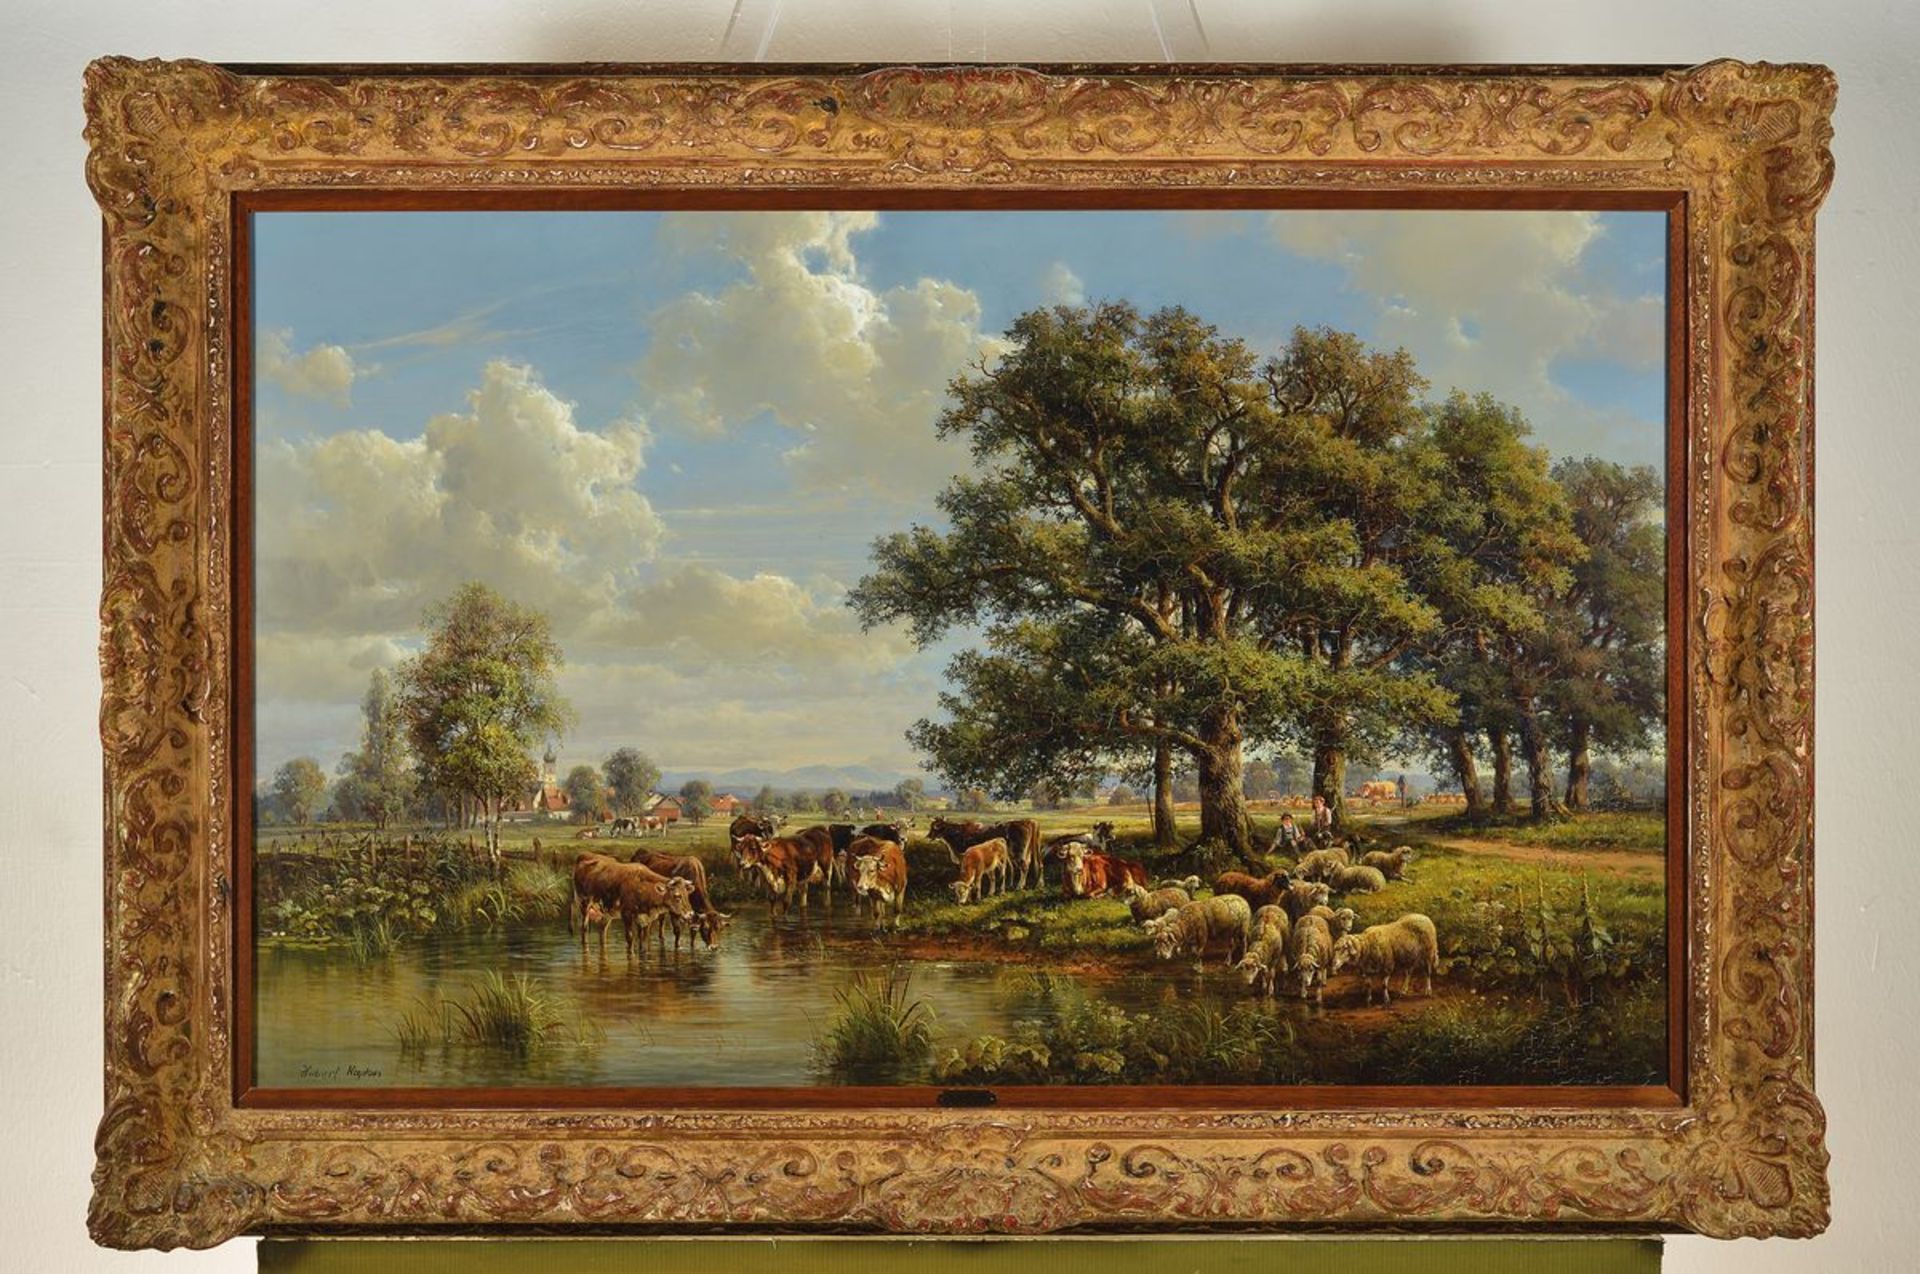 Hubert Kaplan, 1940 Munich, southern german landscape with drinking cattle, rich, partly miniature - Image 3 of 3